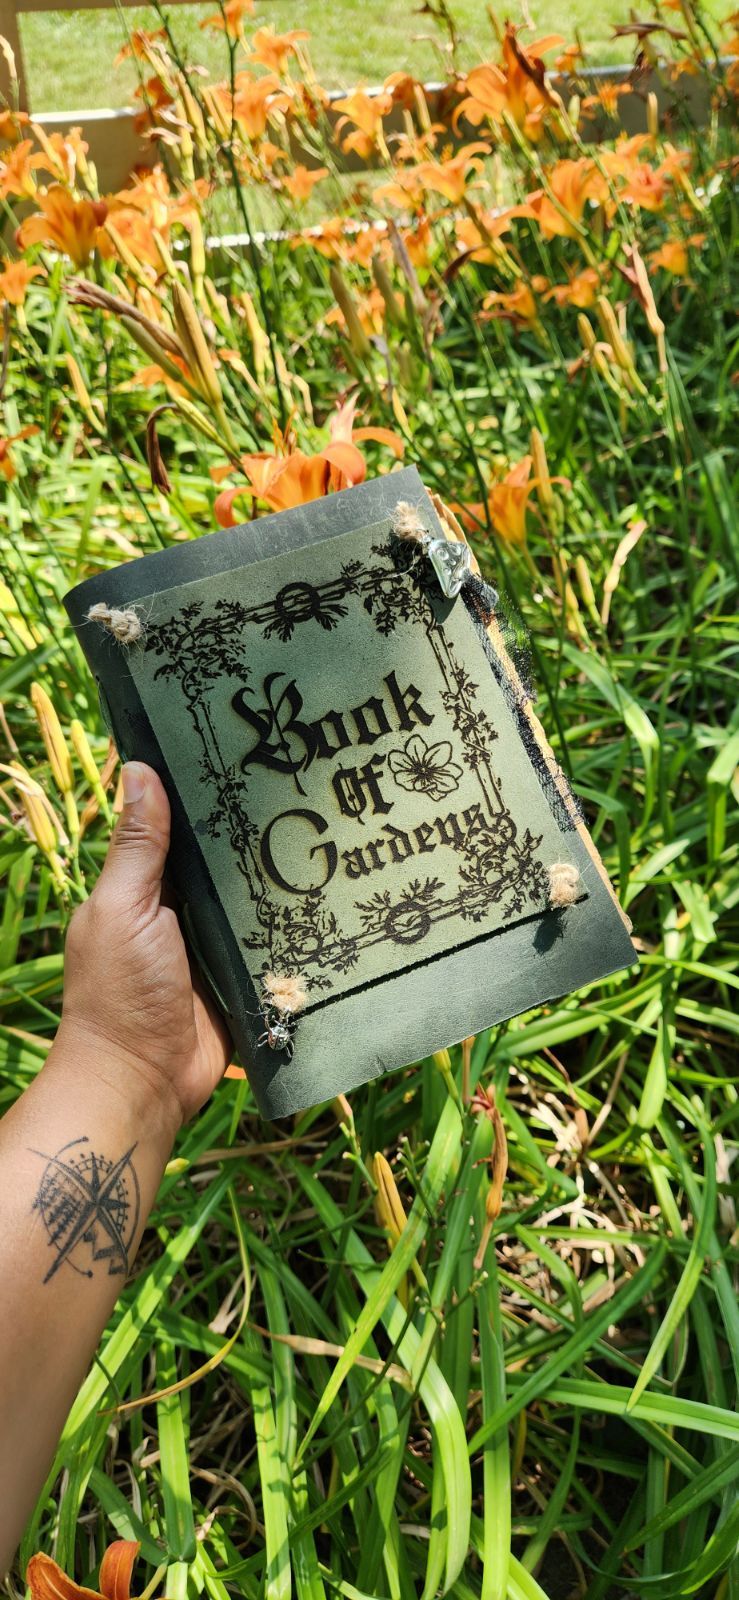 Book of Gardens leather journal